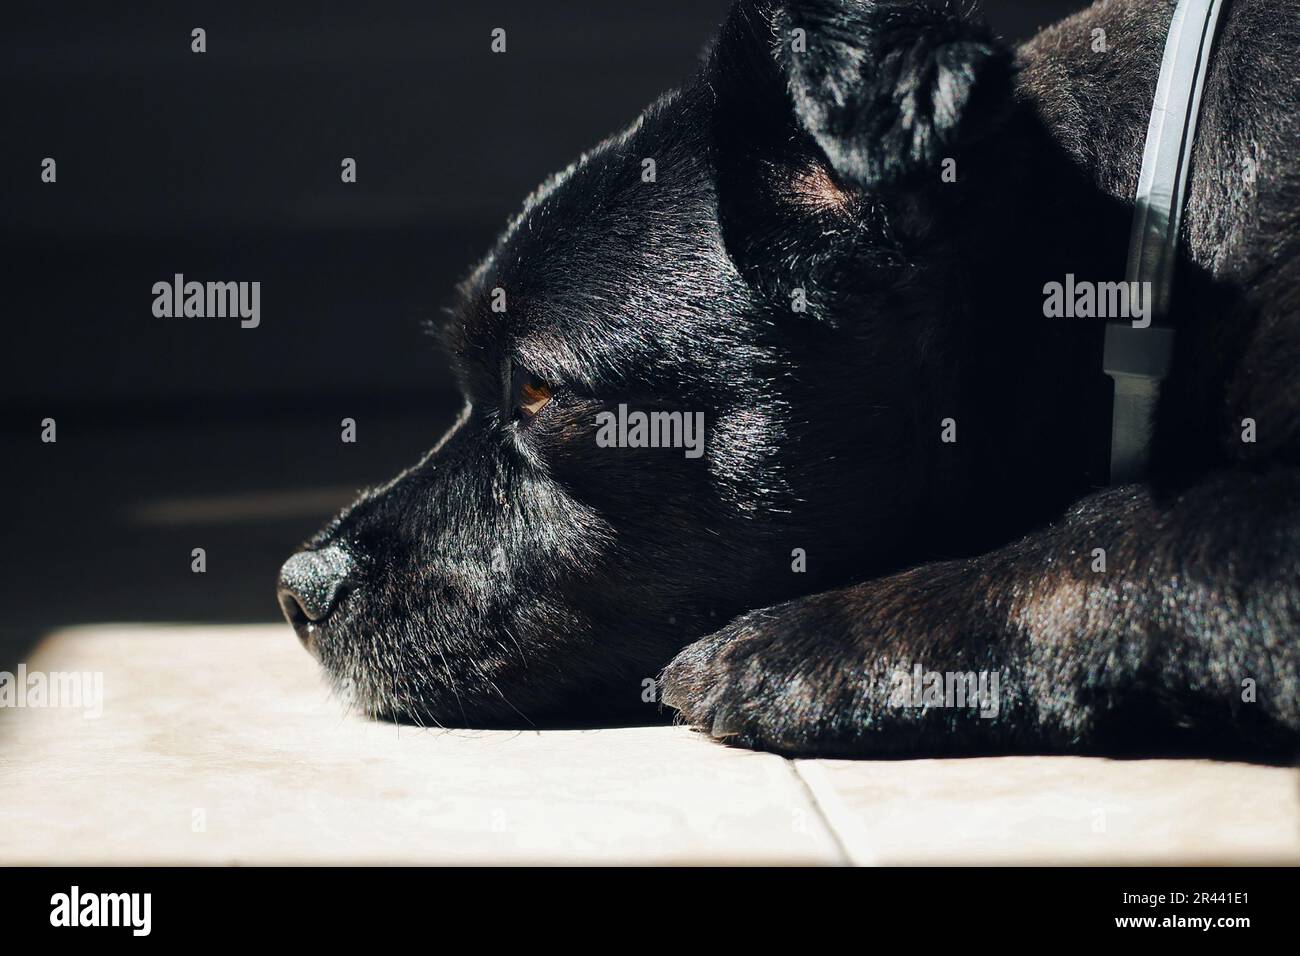 Black dog with brown eyes lying on the floor. Stock Photo